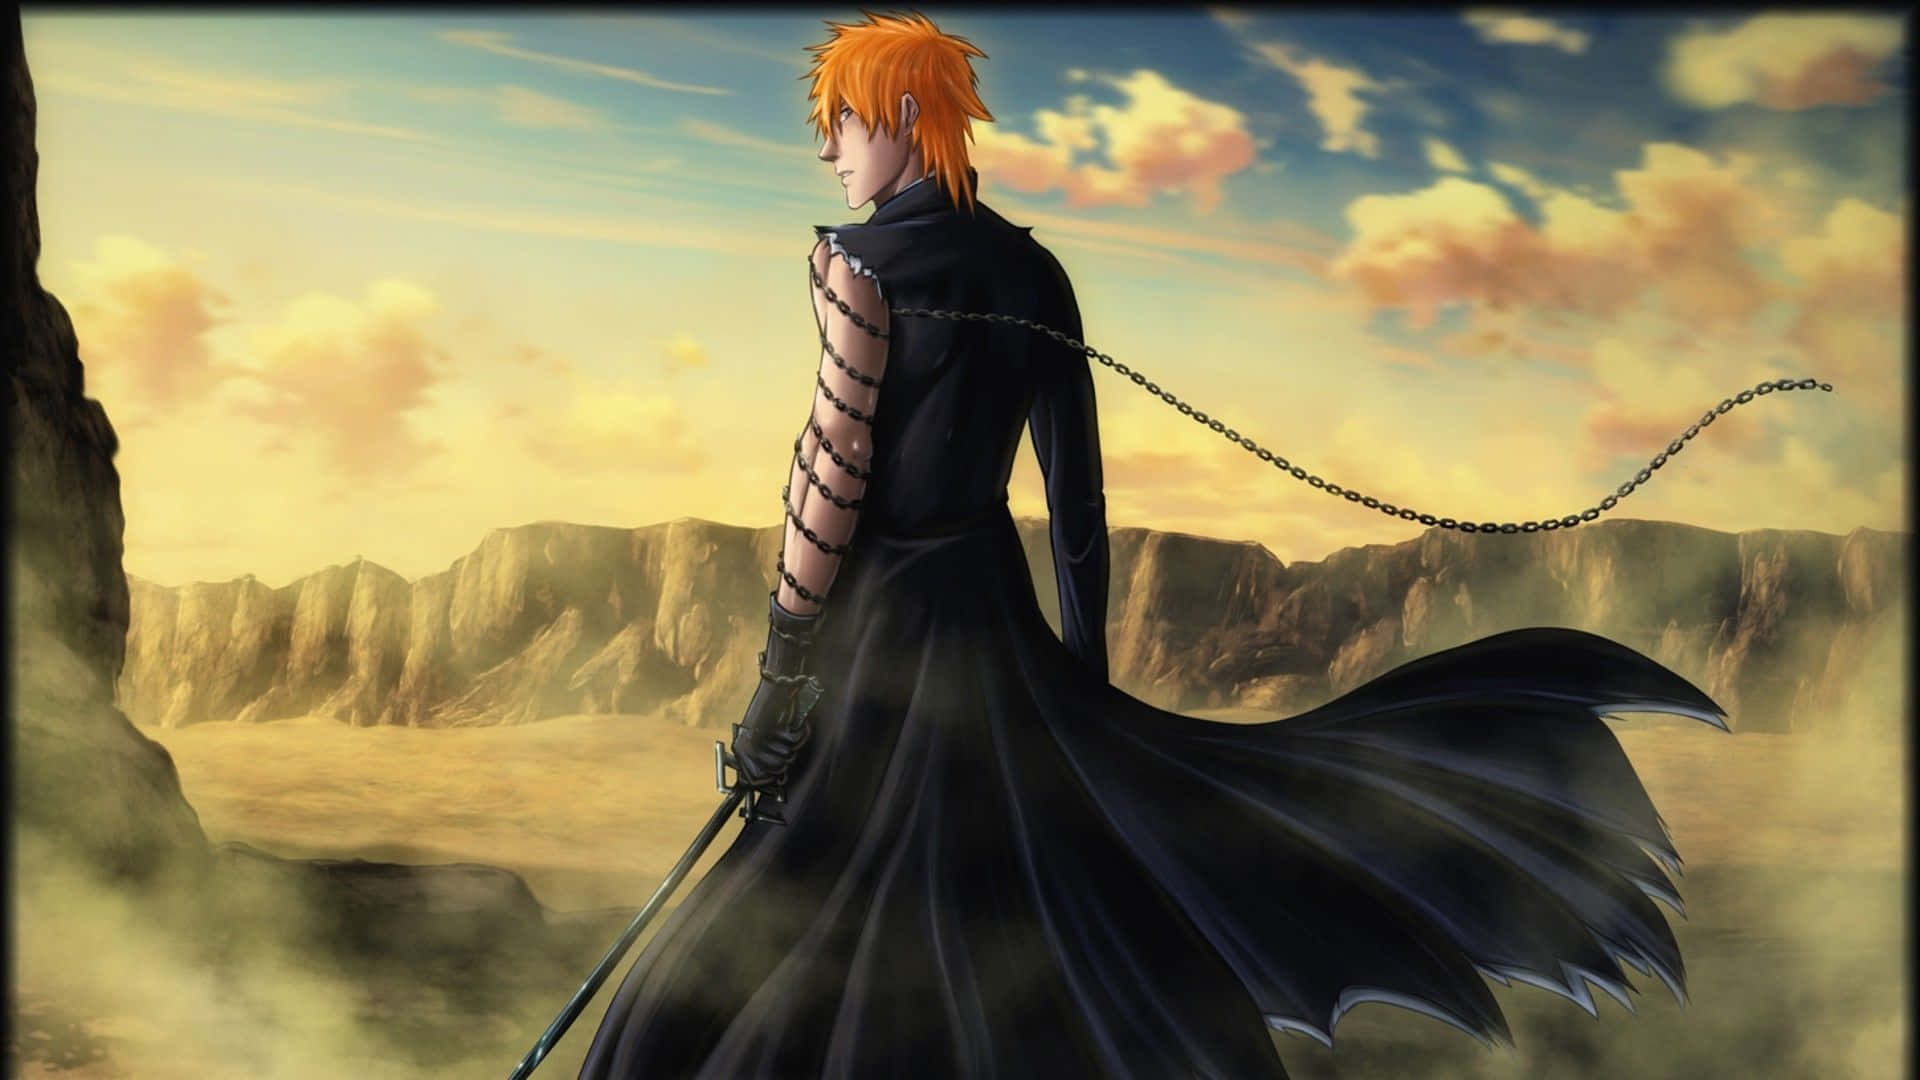 Fight enemy forces with custom teams in the intense man-to-man combat strategy game Bleach PC. Wallpaper